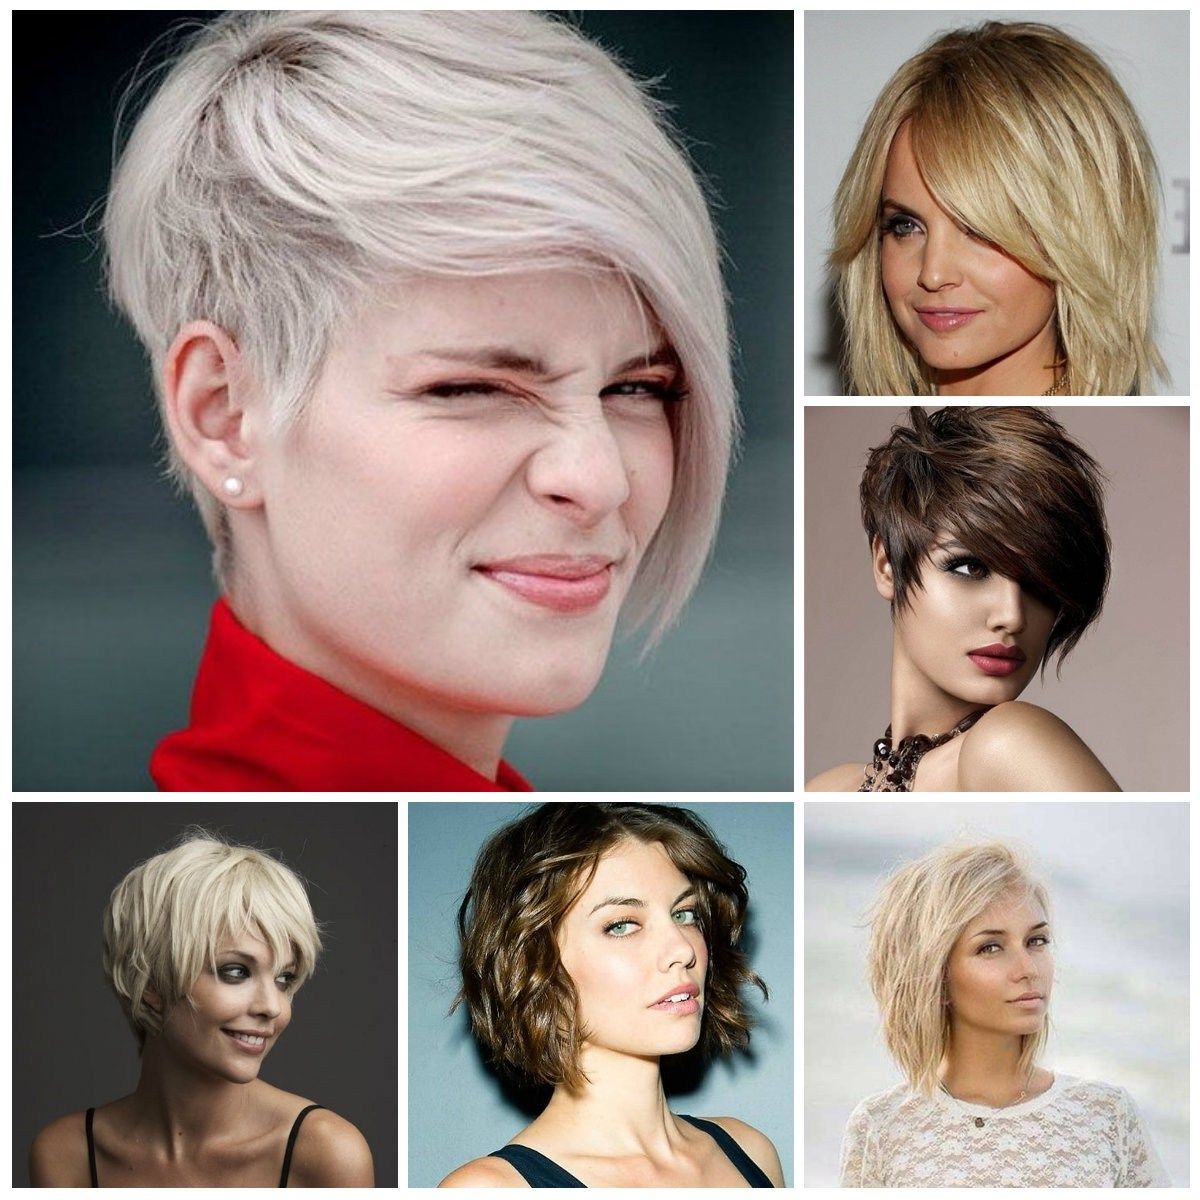 Trendy Haircuts Short Hair | 55 Ombre Hairstyles Short Hair Best Of Throughout Short Trendy Hairstyles For Women (View 22 of 25)